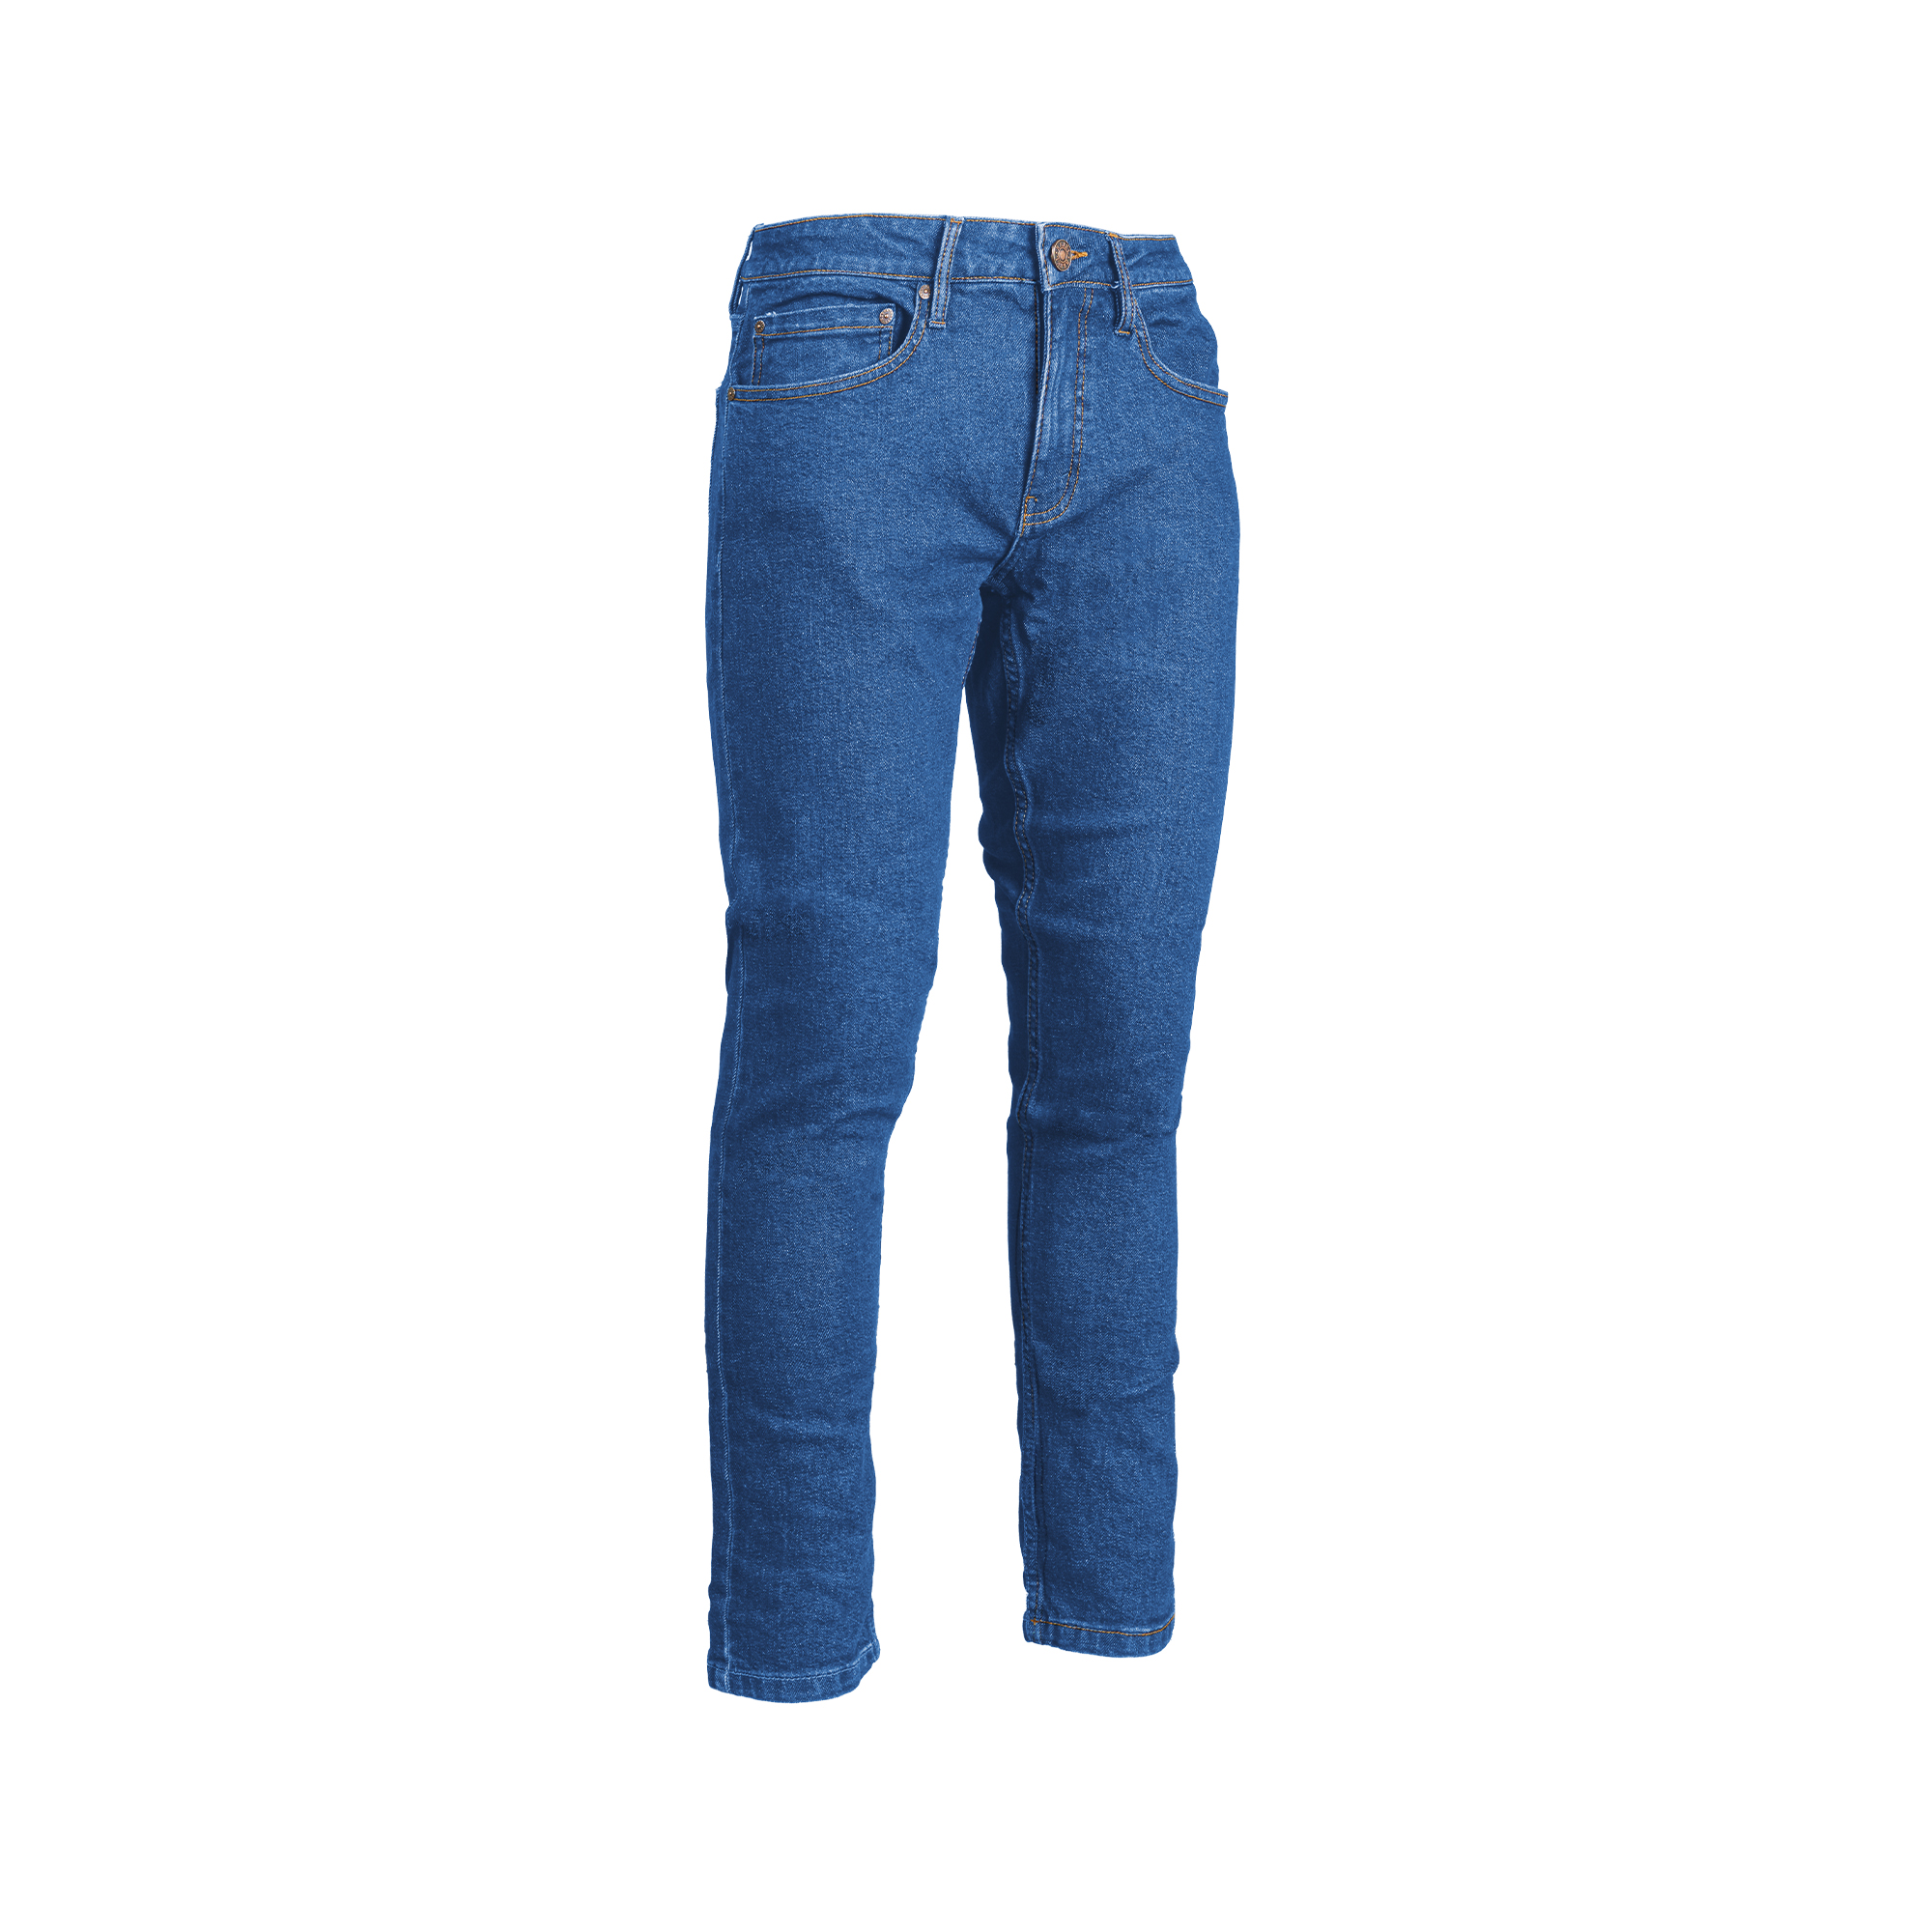 Work_Wear_Mens_Jeans_Mid_Blue_Front_Angle